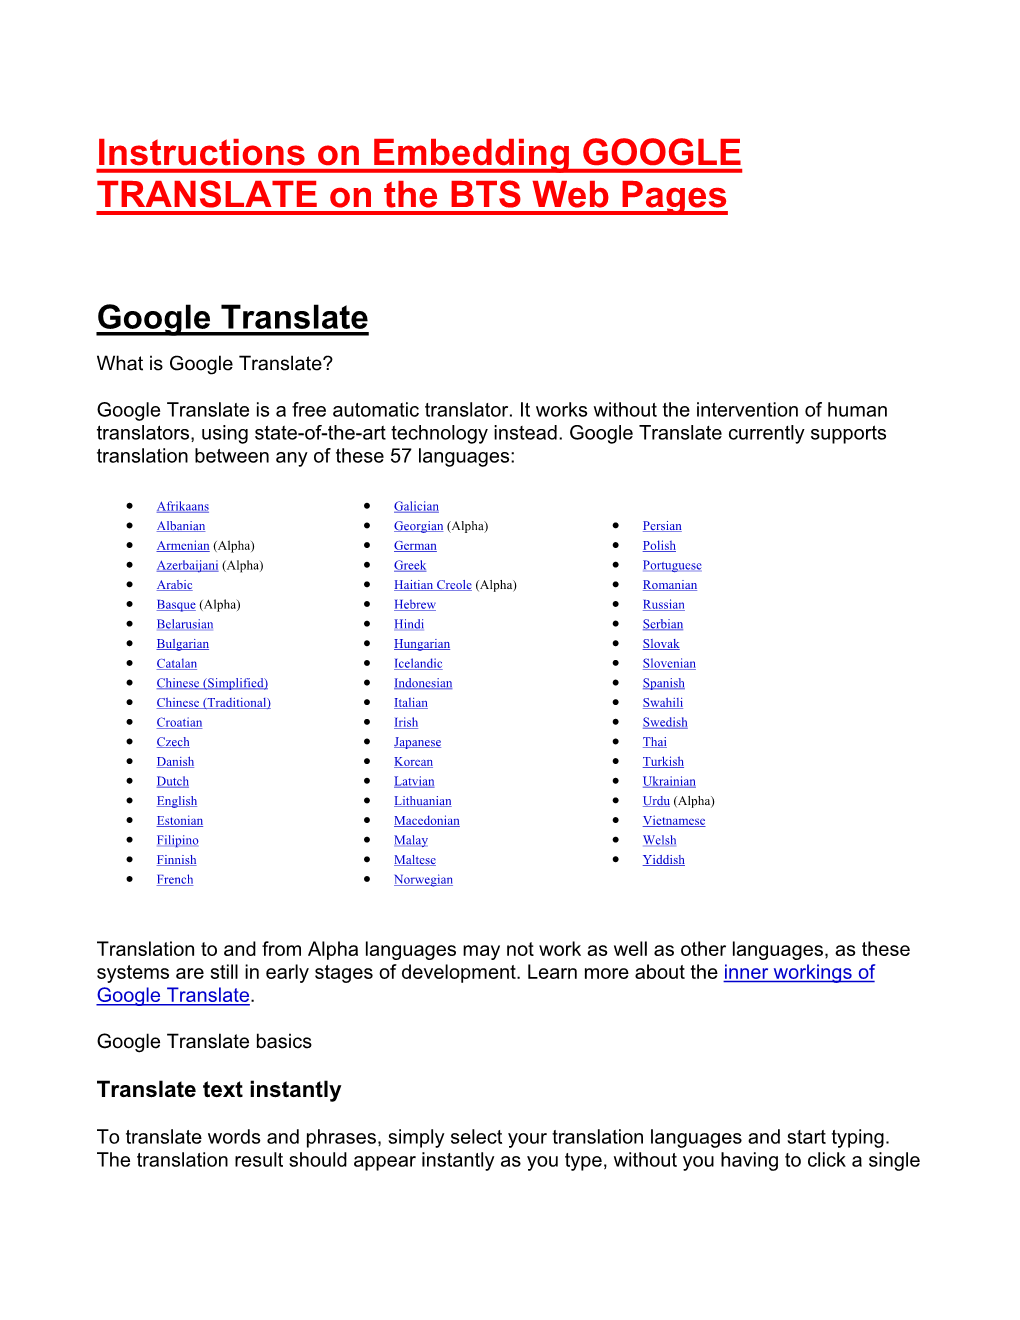 Instructions on Embedding GOOGLE TRANSLATE on the BTS Web Pages